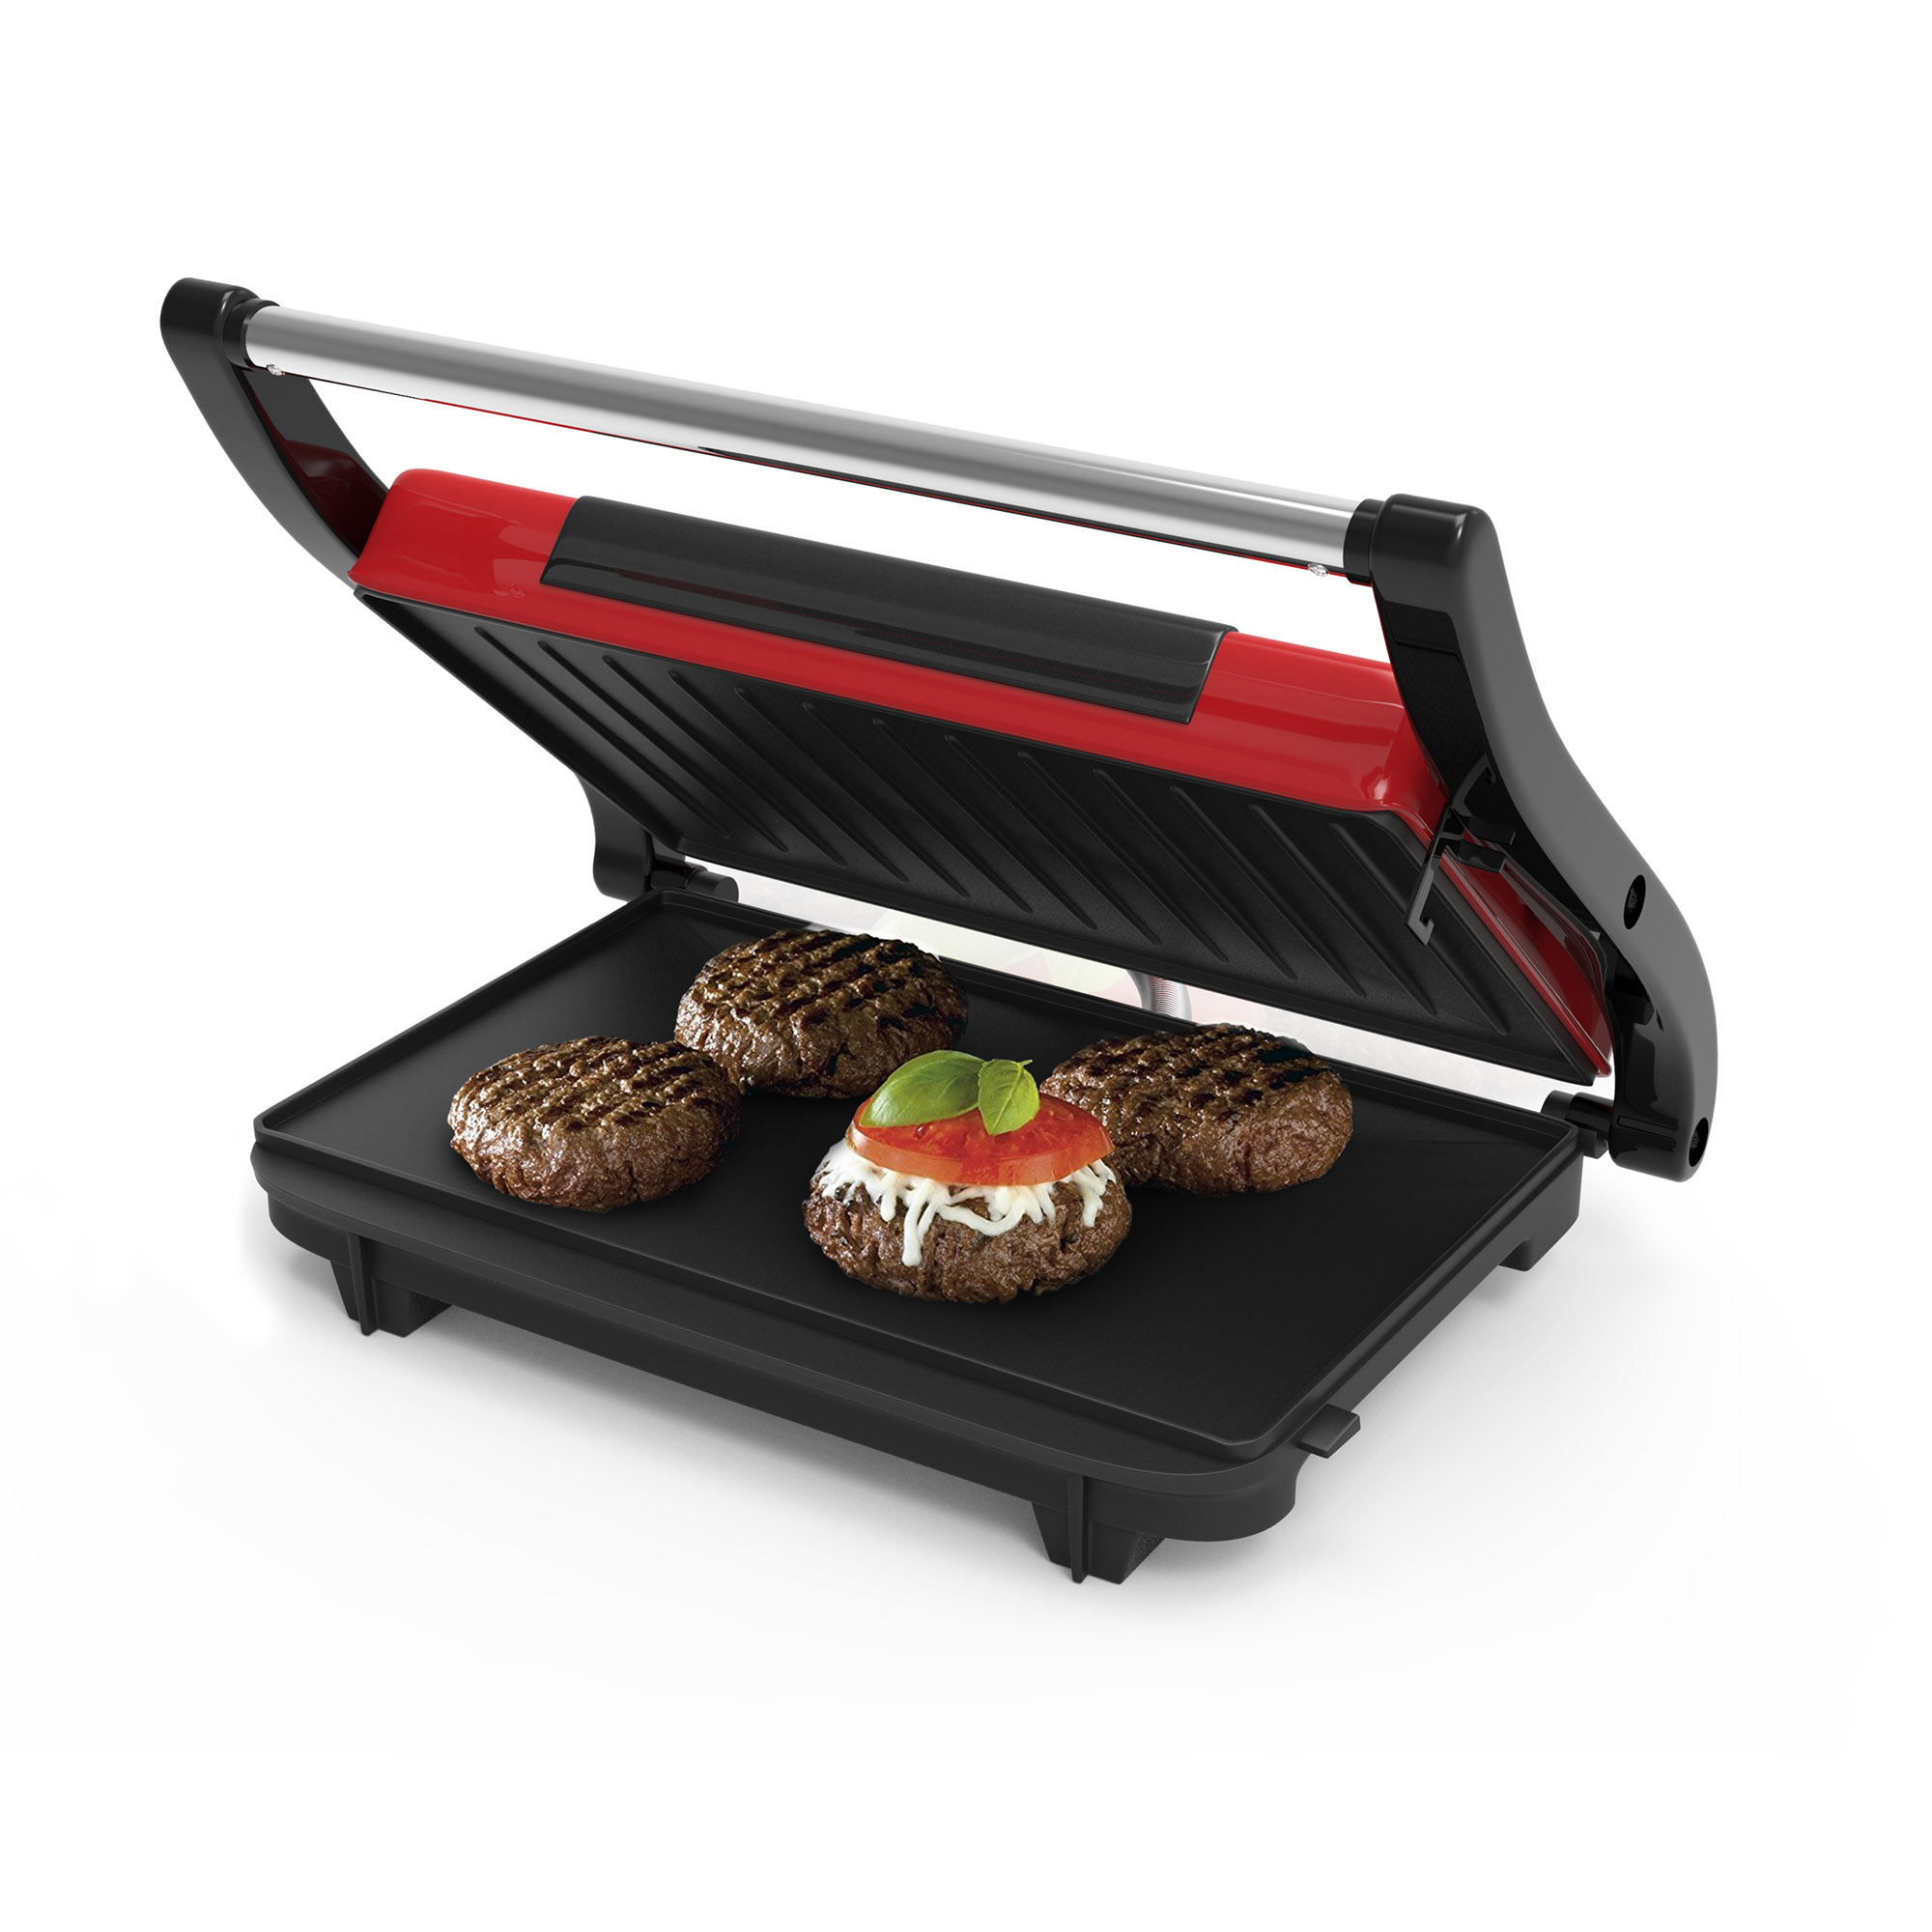 Chef Buddy Non-Stick Grill and Panini Press, Red - image 5 of 8